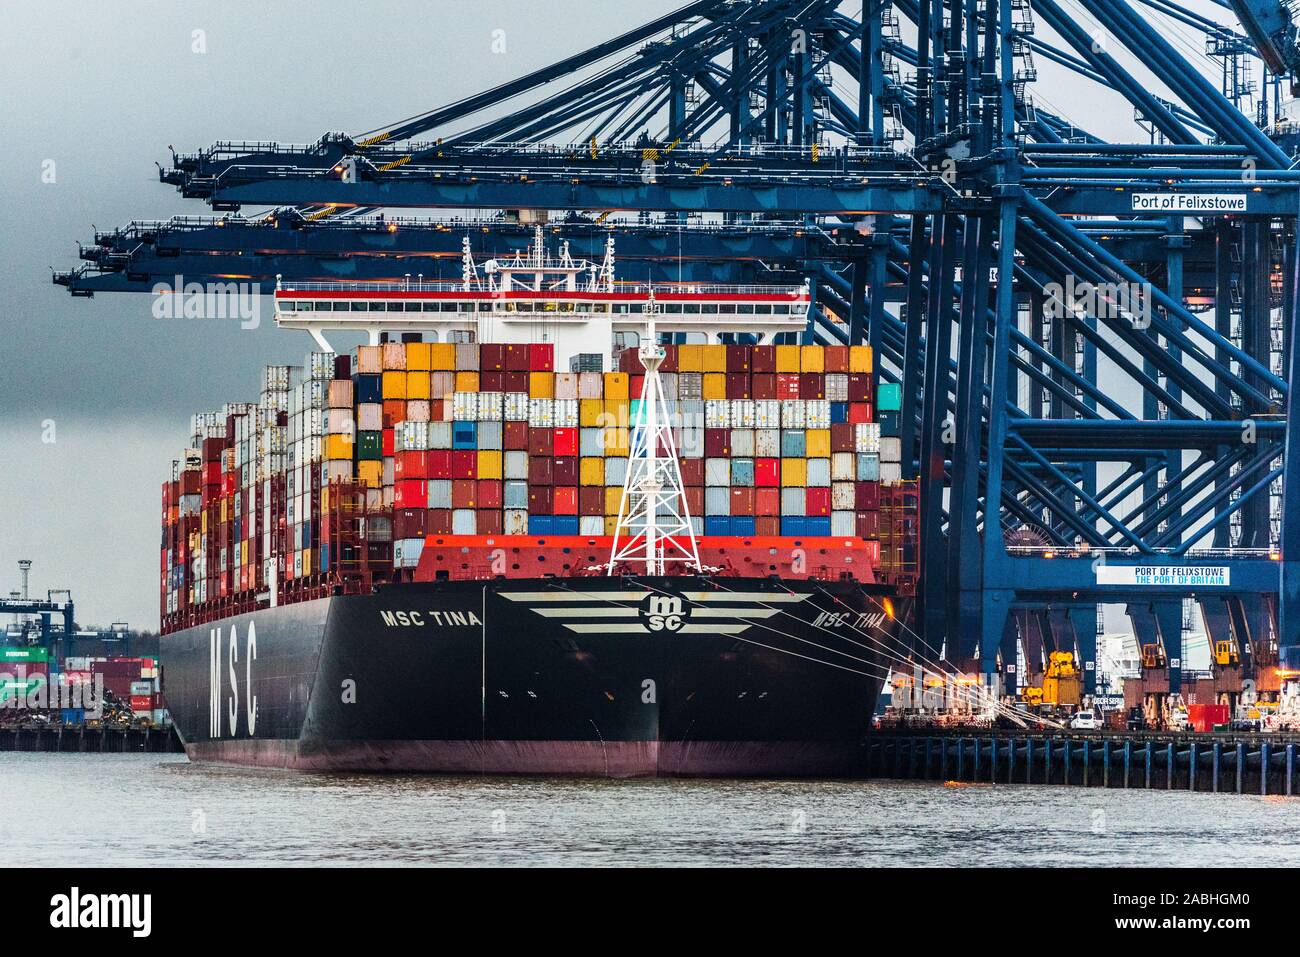 British Trade at Felixstowe Port - MSC Tina Container Vessel unloads containers at the Port of Felixstowe. Stock Photo